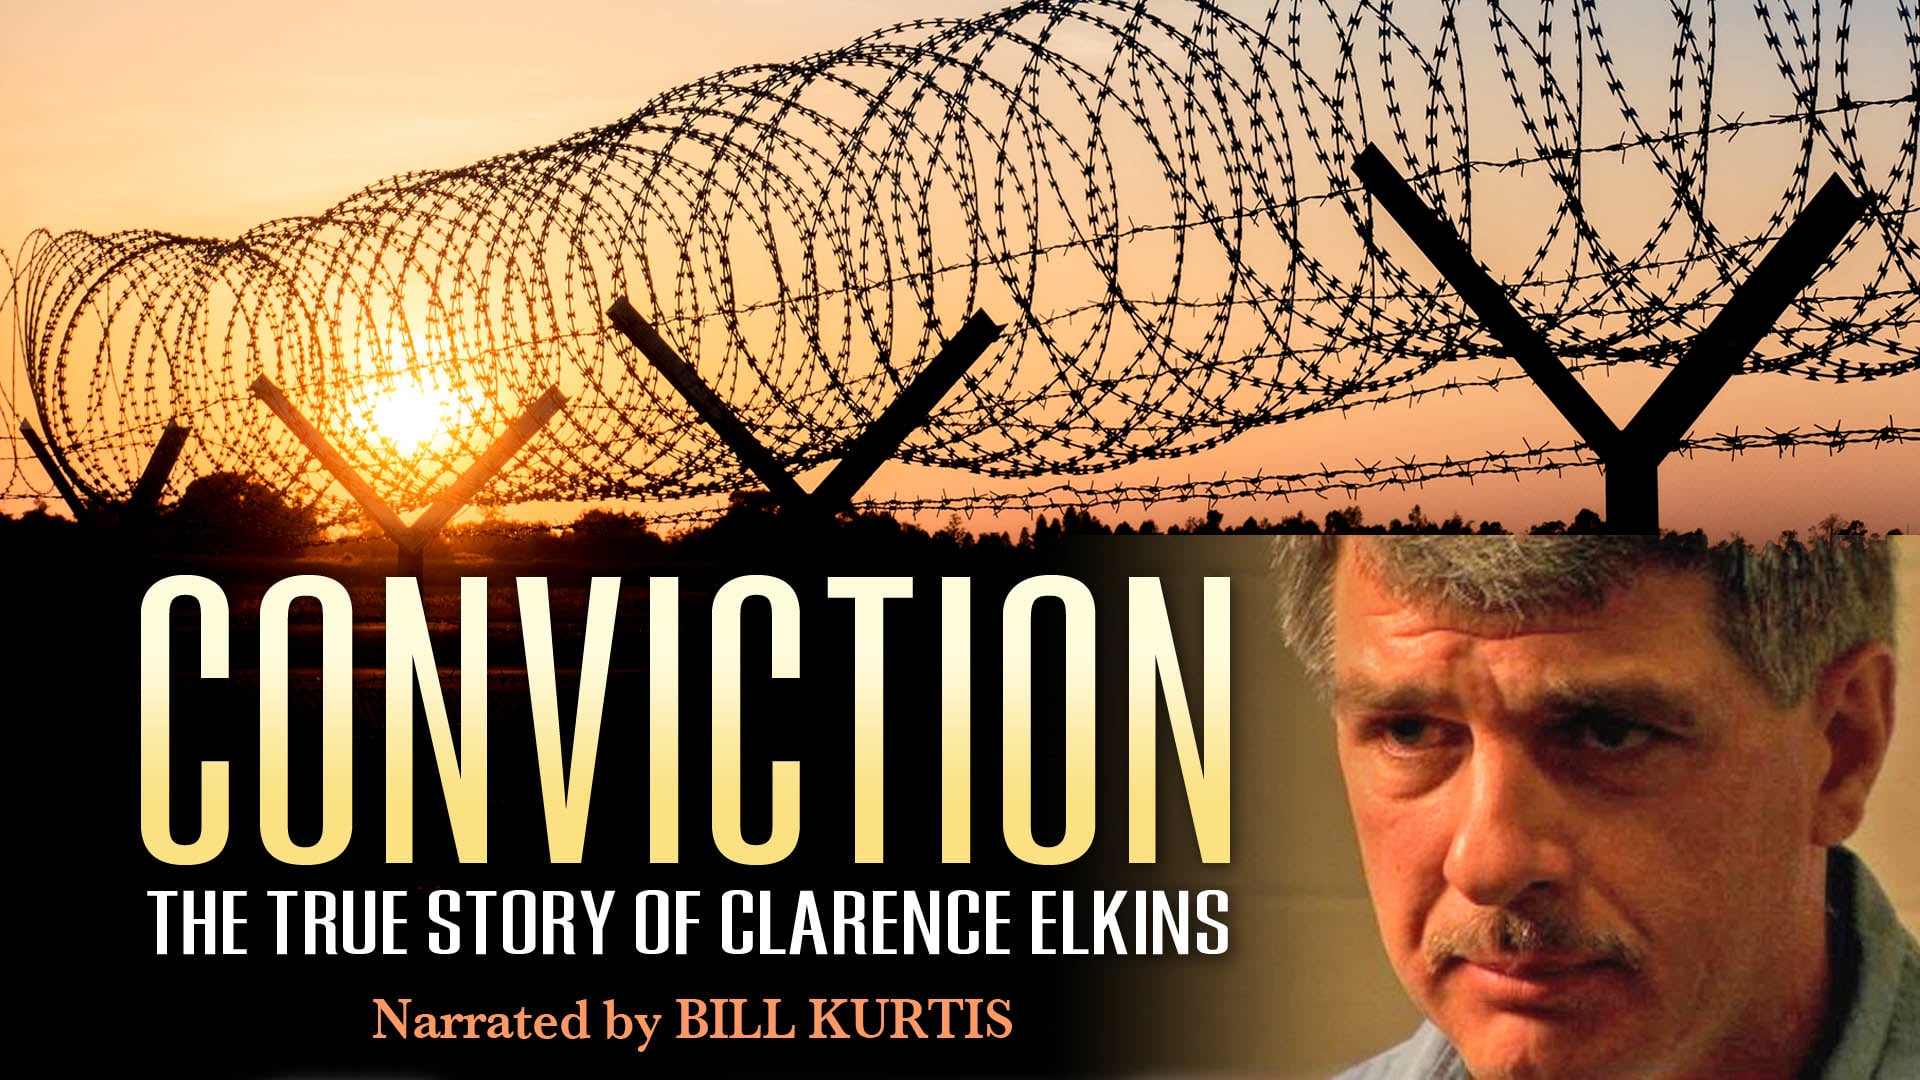 Conviction: The True Story of Clarence Elkins - Trailer